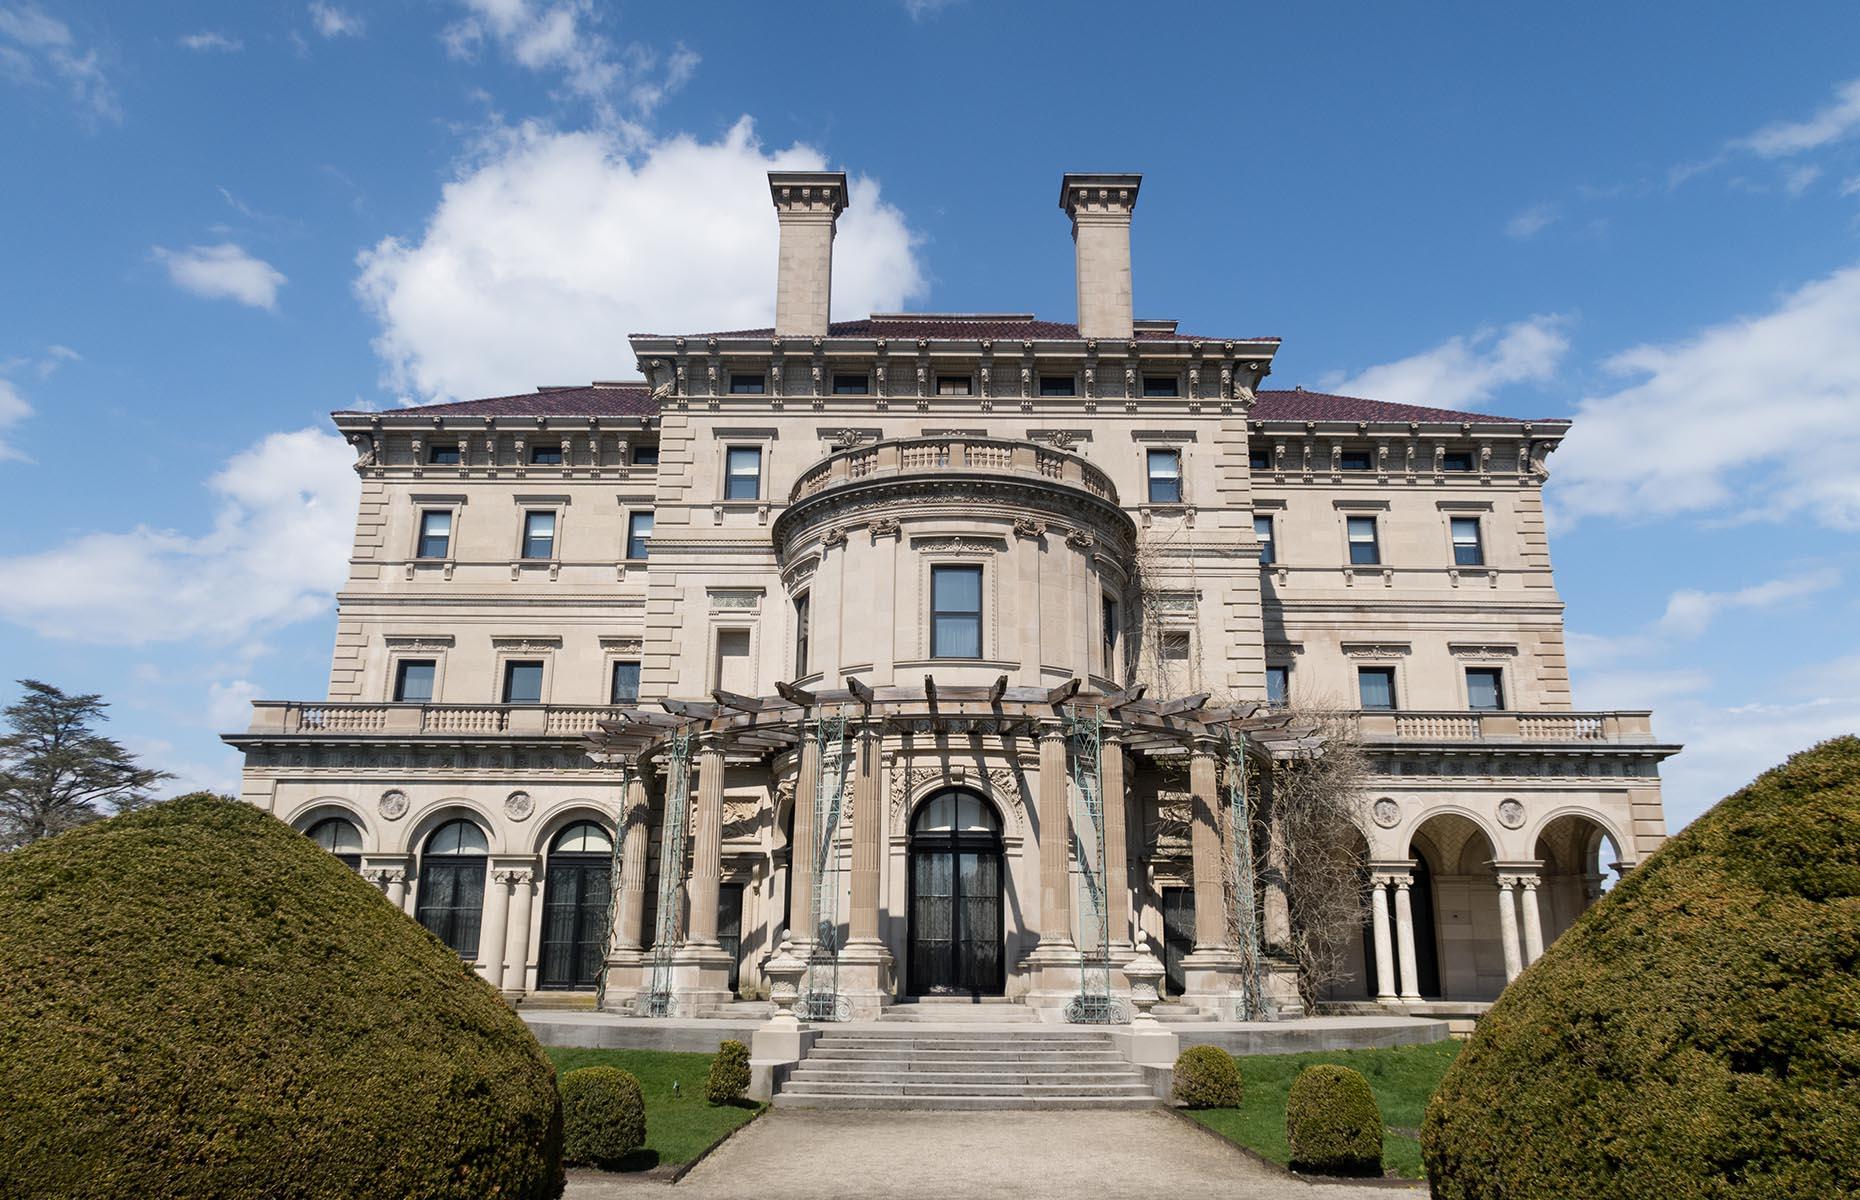 This extravagant country home in Newport was another exquisite property in the wealthy Vanderbilt family's portfolio. Inspired by the 16th-century palaces of Genoa and Turin, Commodore Cornelius Vanderbilt’s grandson, Cornelius Vanderbilt II, commissioned the renovation of this once-wooden cottage and transformed it into an Italian Renaissance-style palazzo. Its lavishly decorated rooms (think platinum, marble and intricate stonework) are some of the most impressive in all of America.